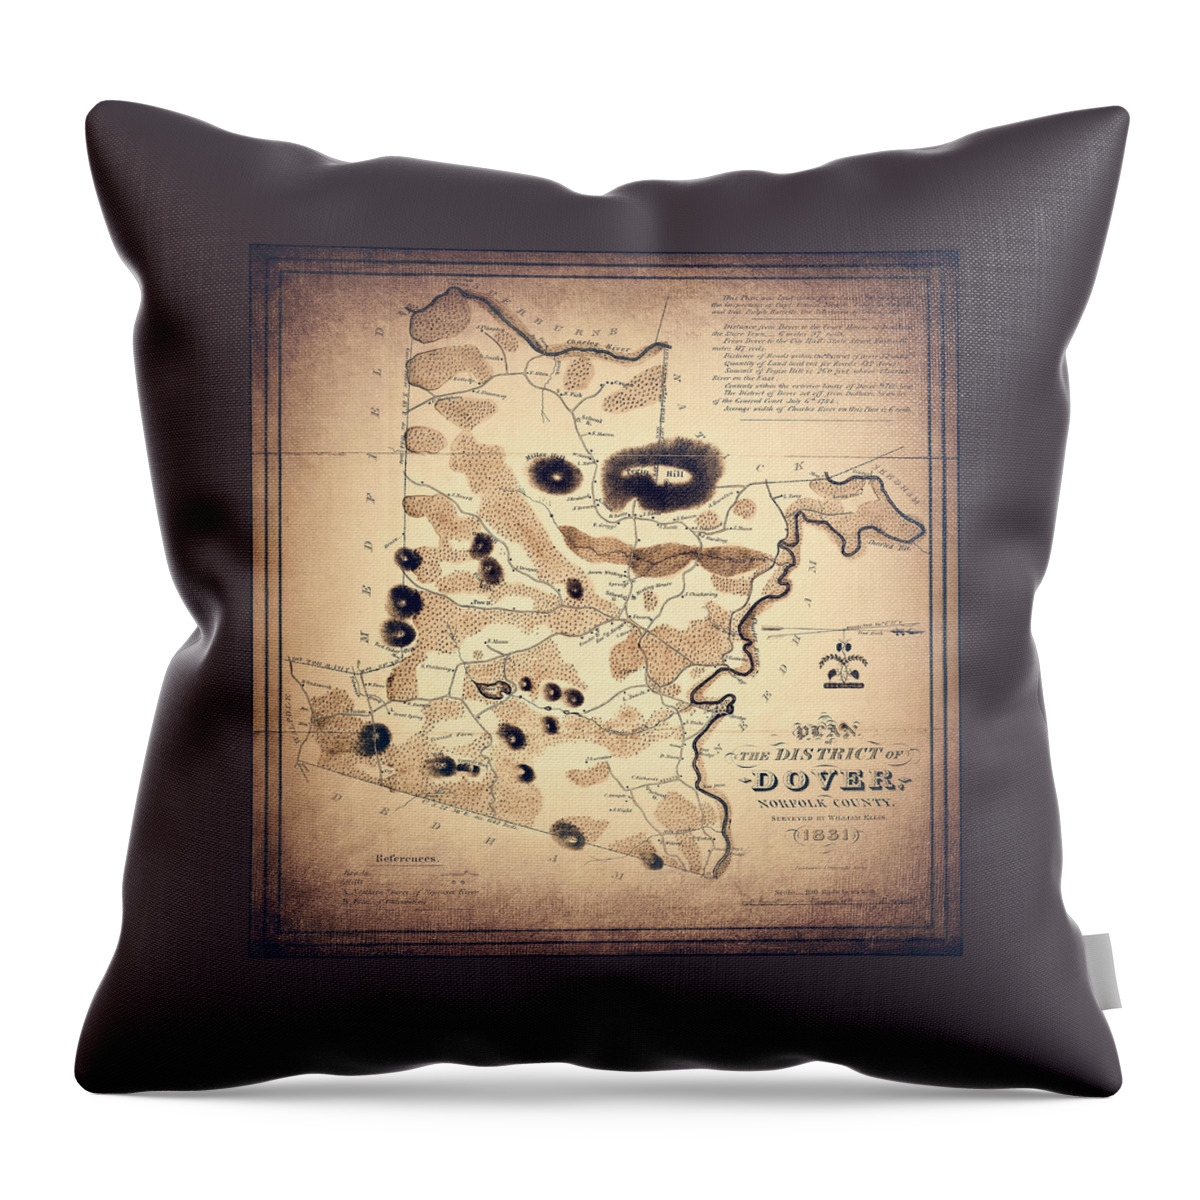 Dover Throw Pillow featuring the photograph Dover Massachusetts Historical Map 1831 Sepia by Carol Japp